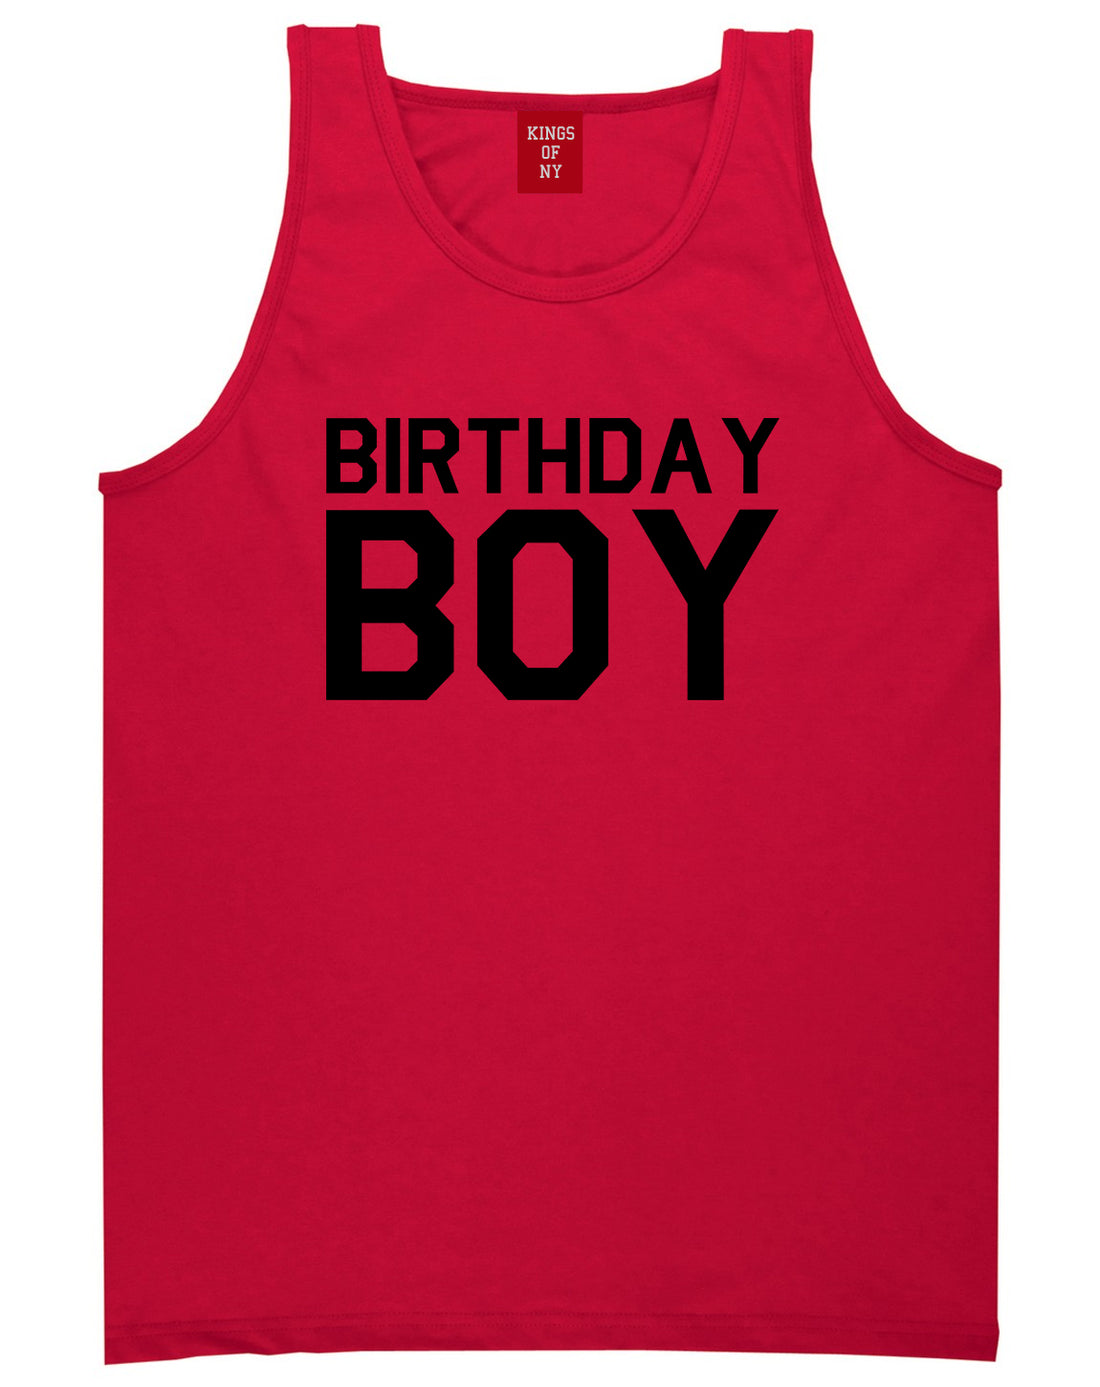 Birthday Boy Red Tank Top Shirt by Kings Of NY